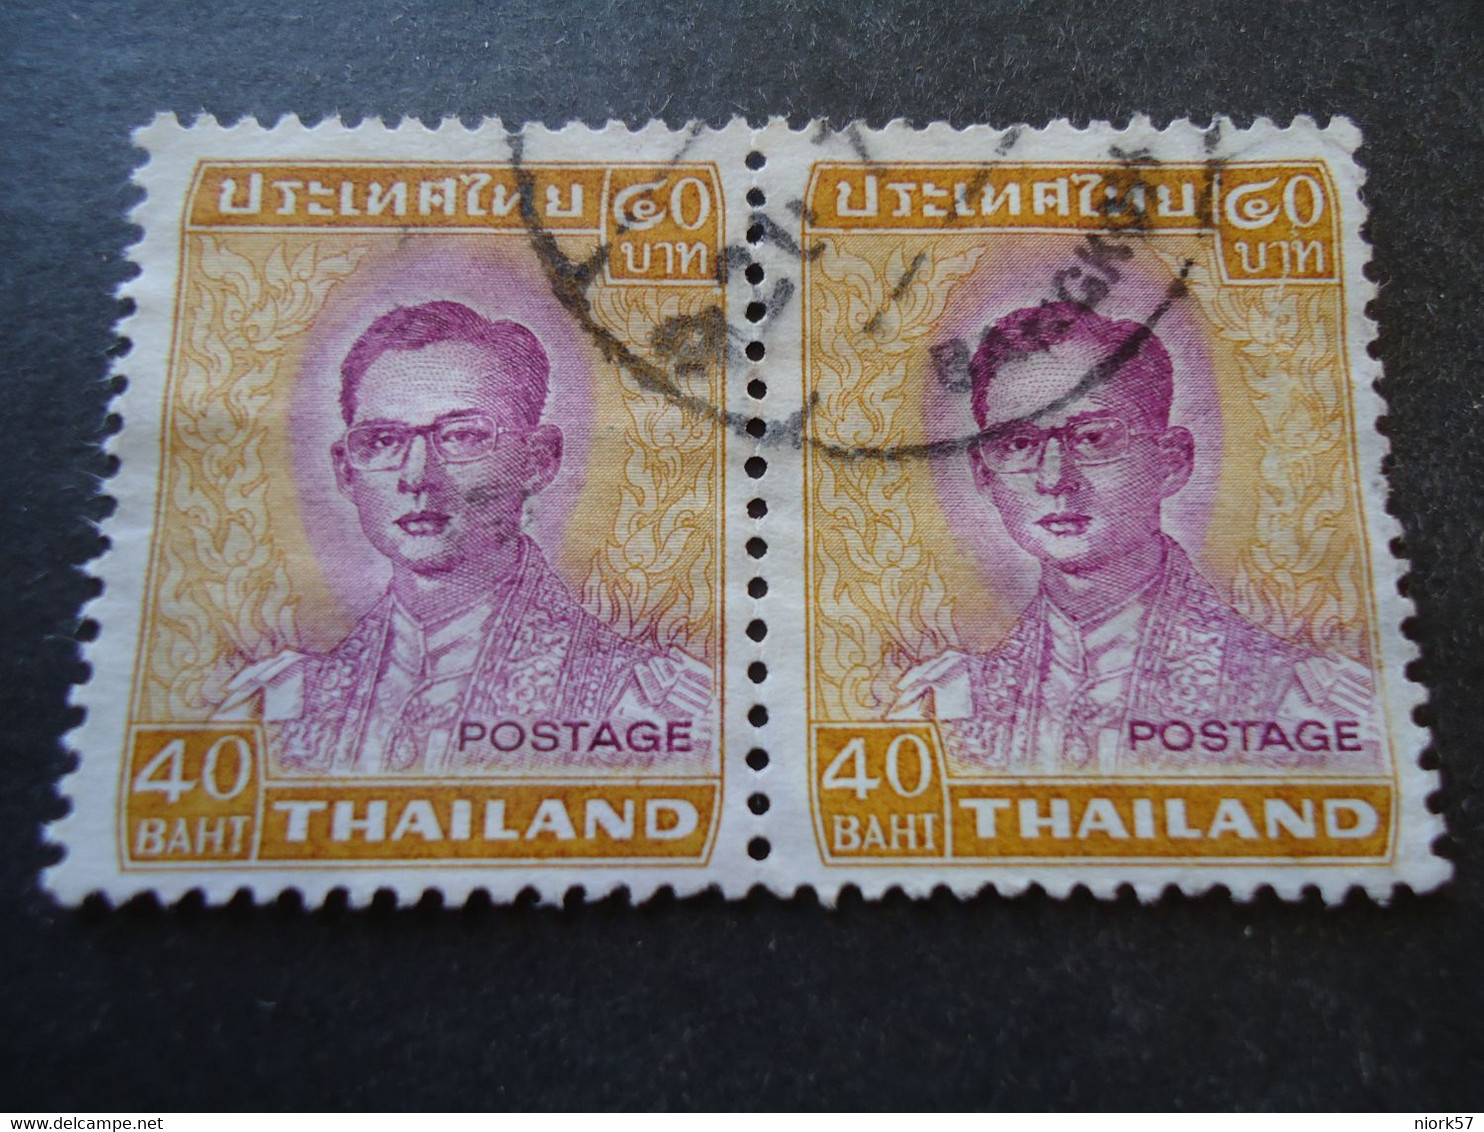 THAILAND USED  STAMPS  KING  PAIR 40  BAH - Tailandia